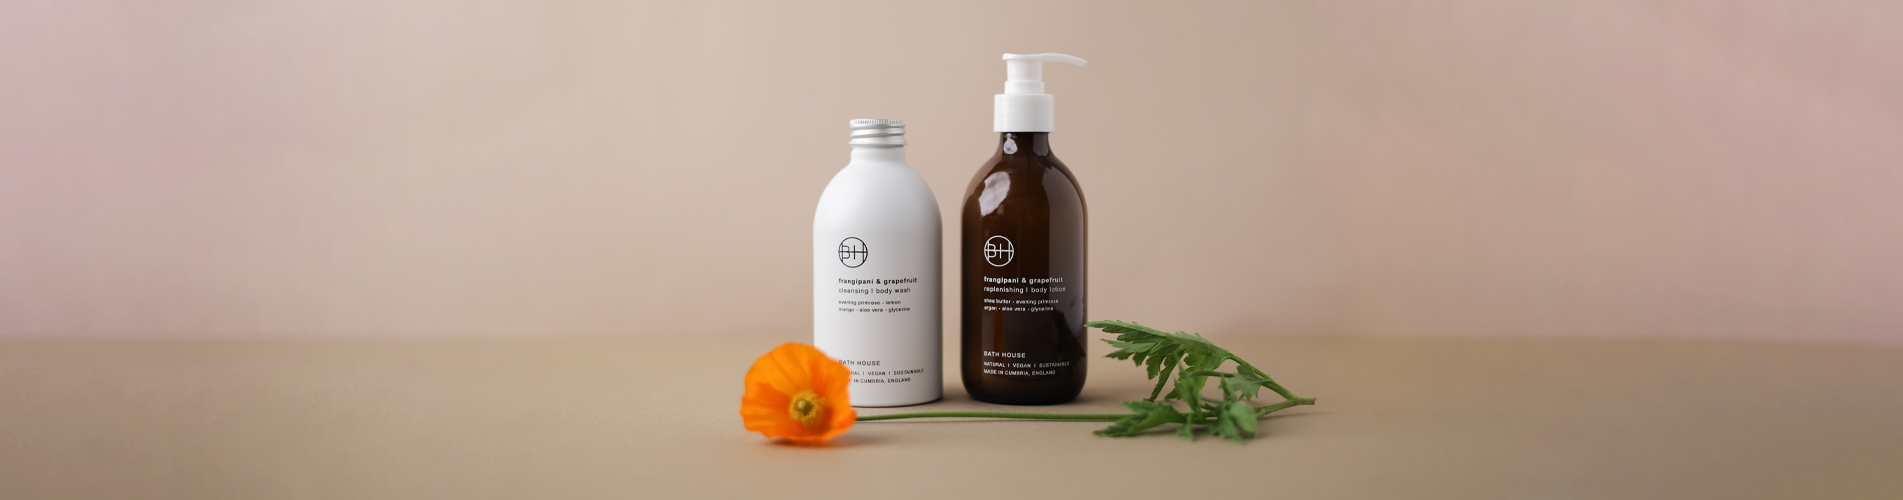 Banner Image Of The Bodycare Pairings Product Category